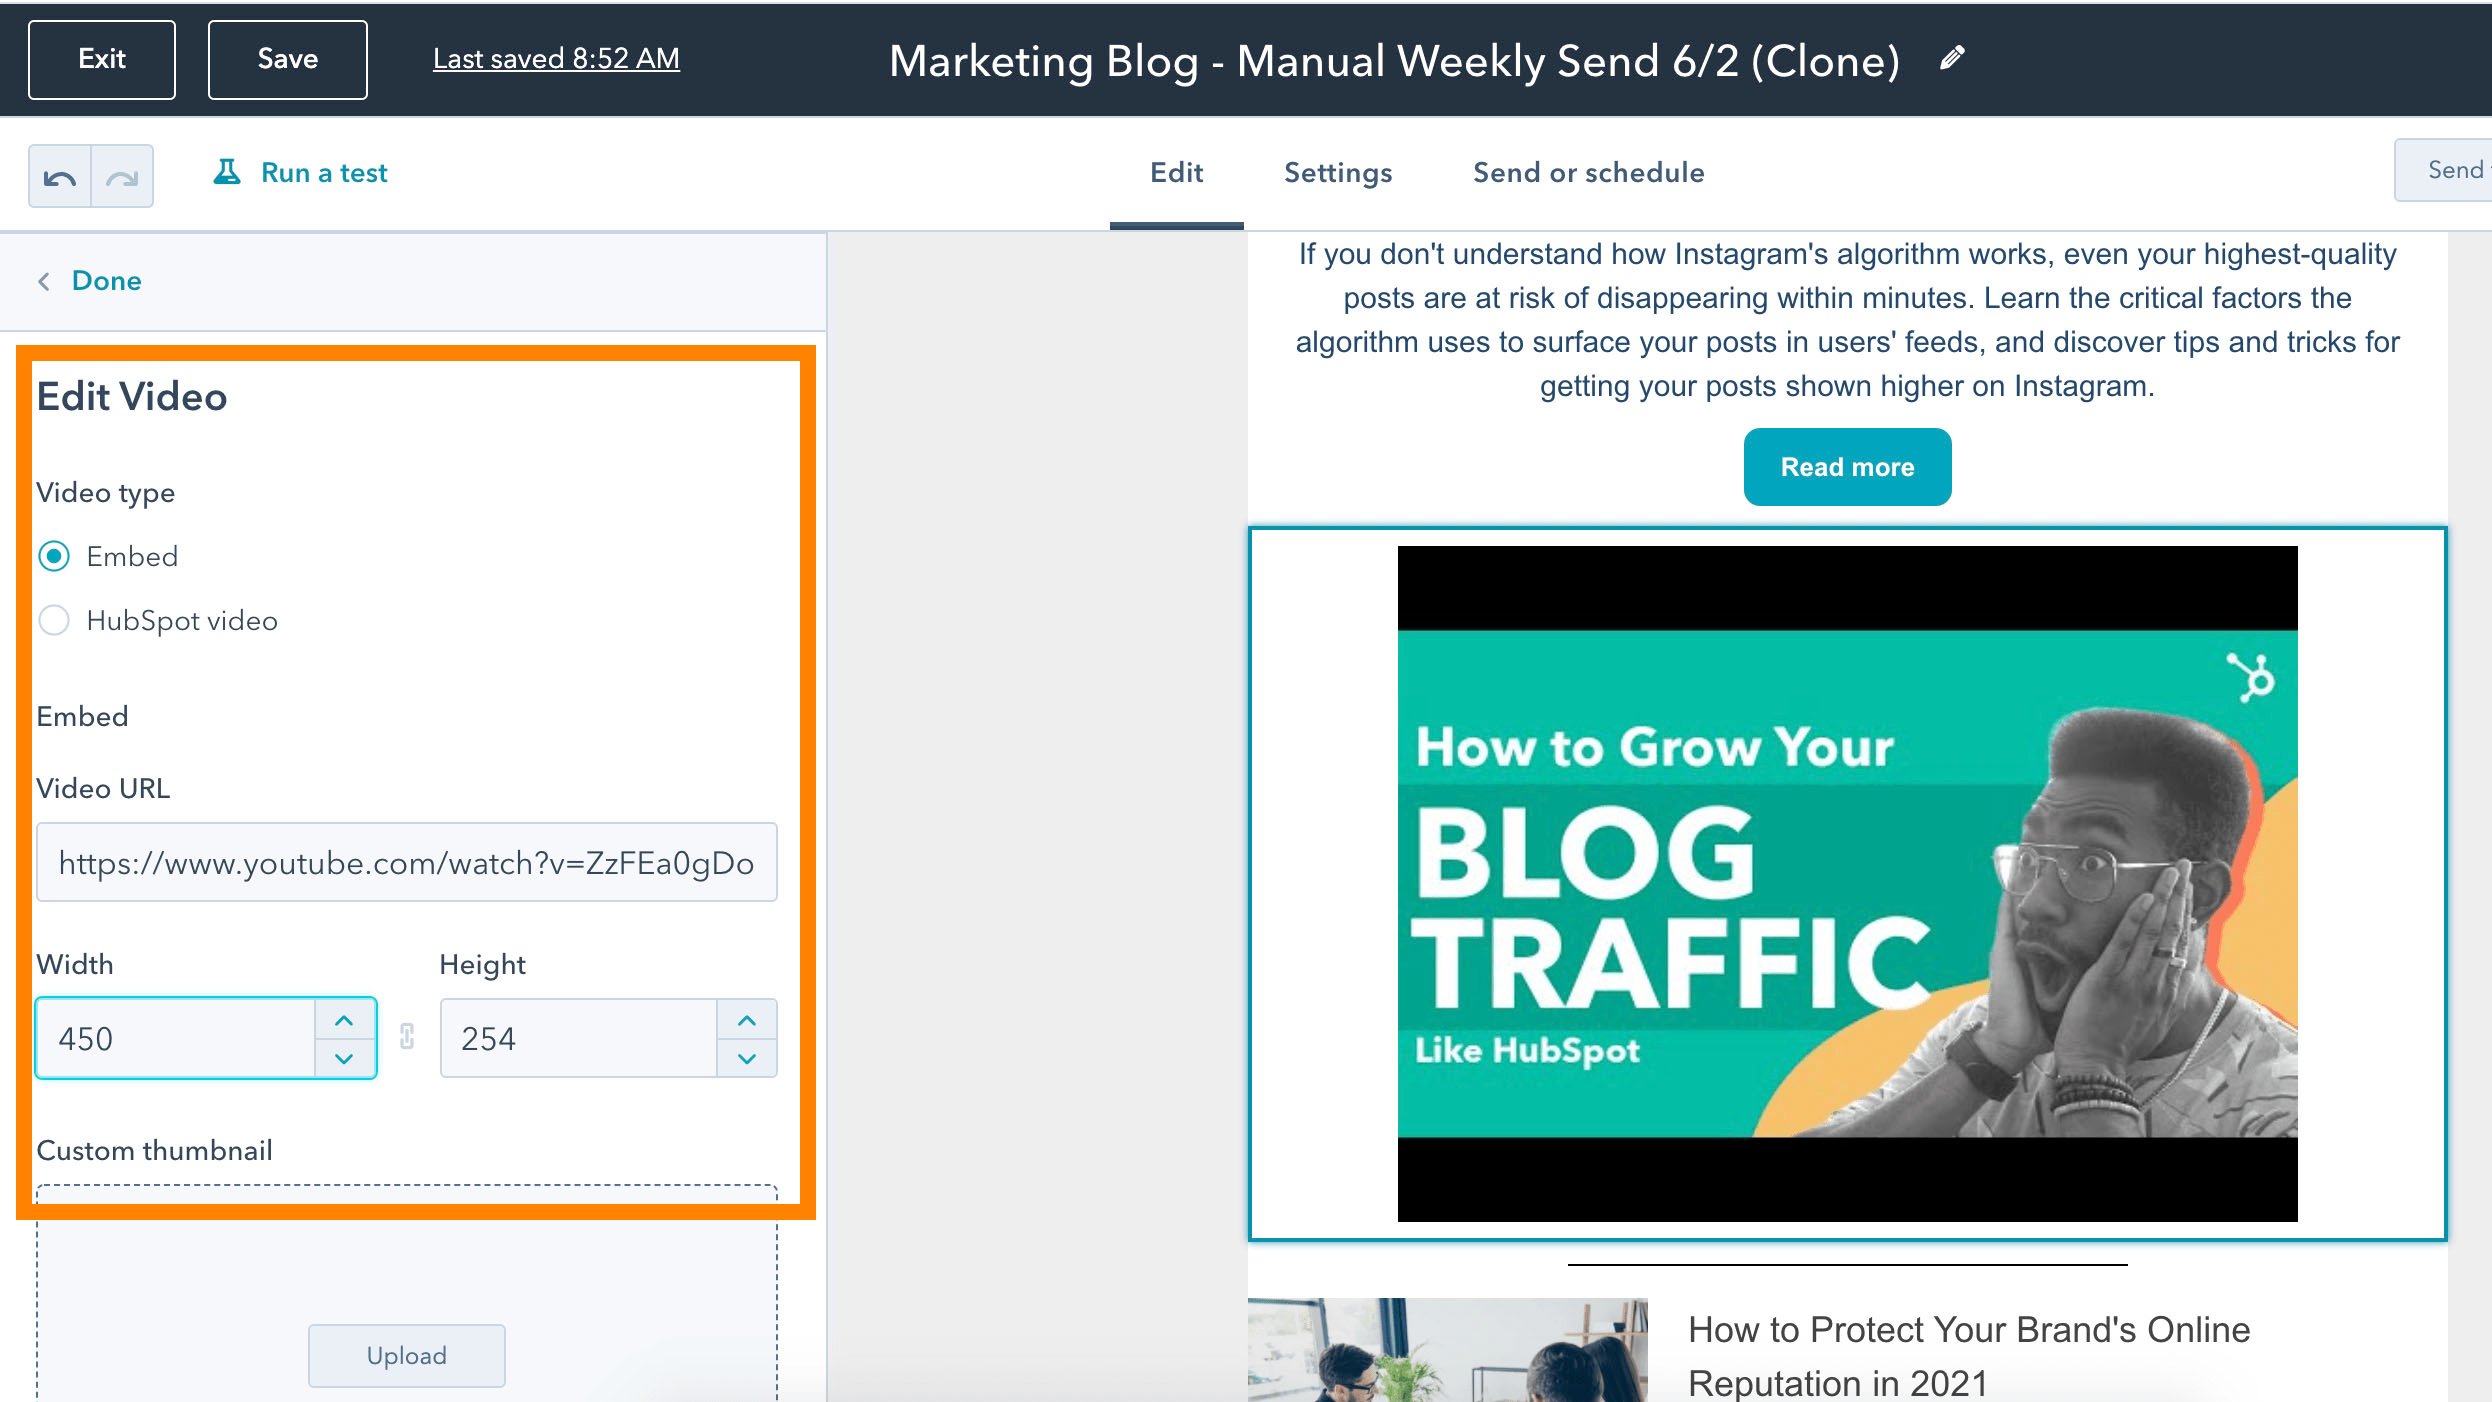 How to embed a video in an email, editing video through HubSpot email tool.